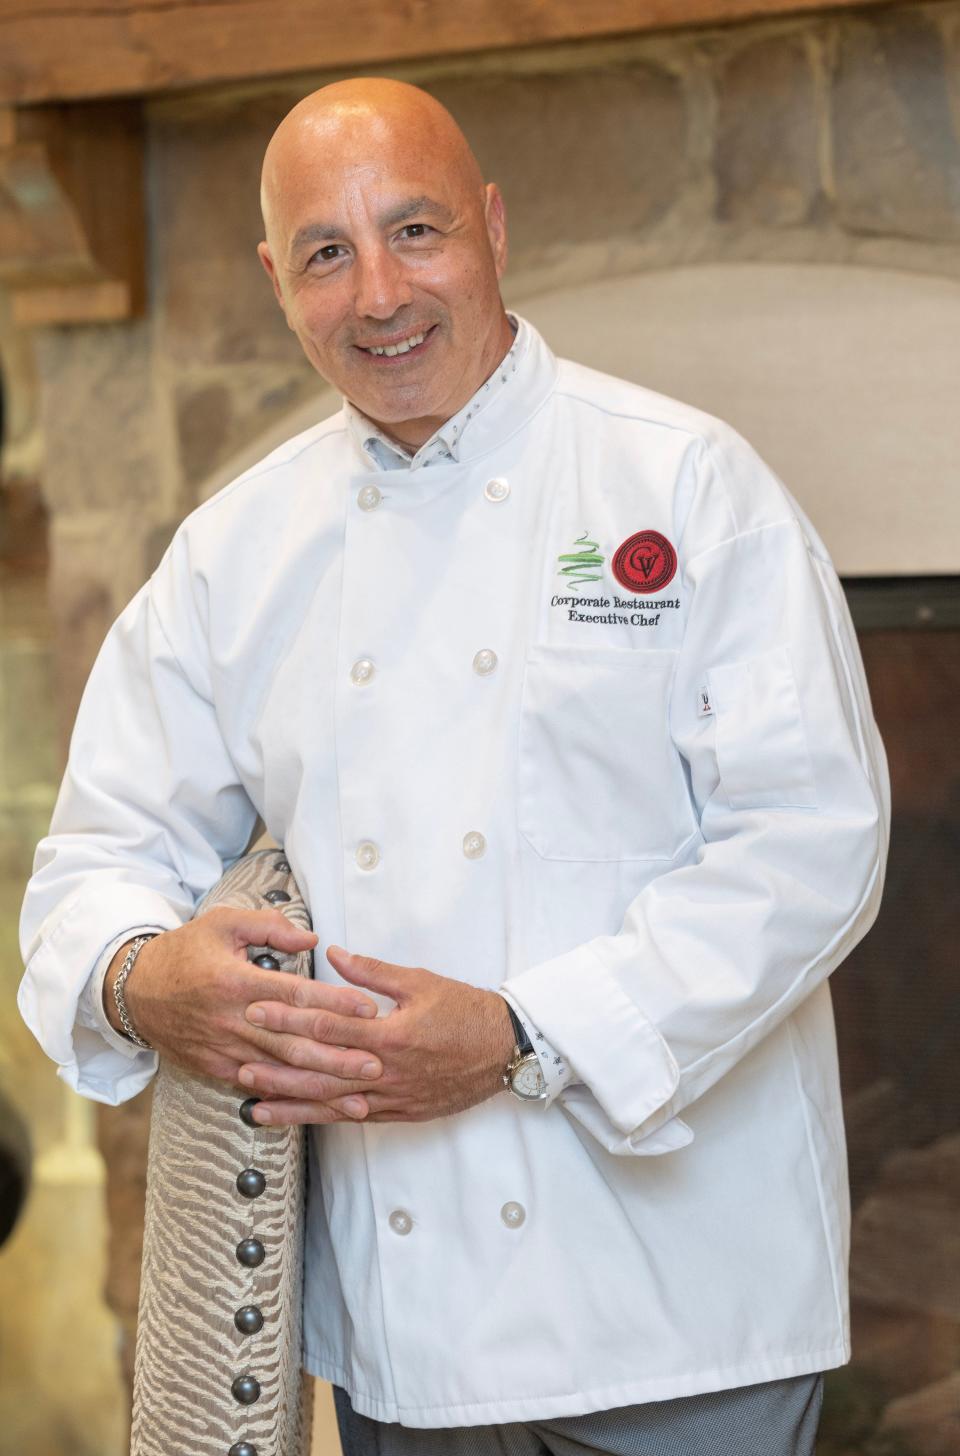 Joe Pileggi is the new corporate executive chef at Gervasi Resort & Spa in Canton. The GlenOak graduate was educated at the Culinary Institute of America in New York.